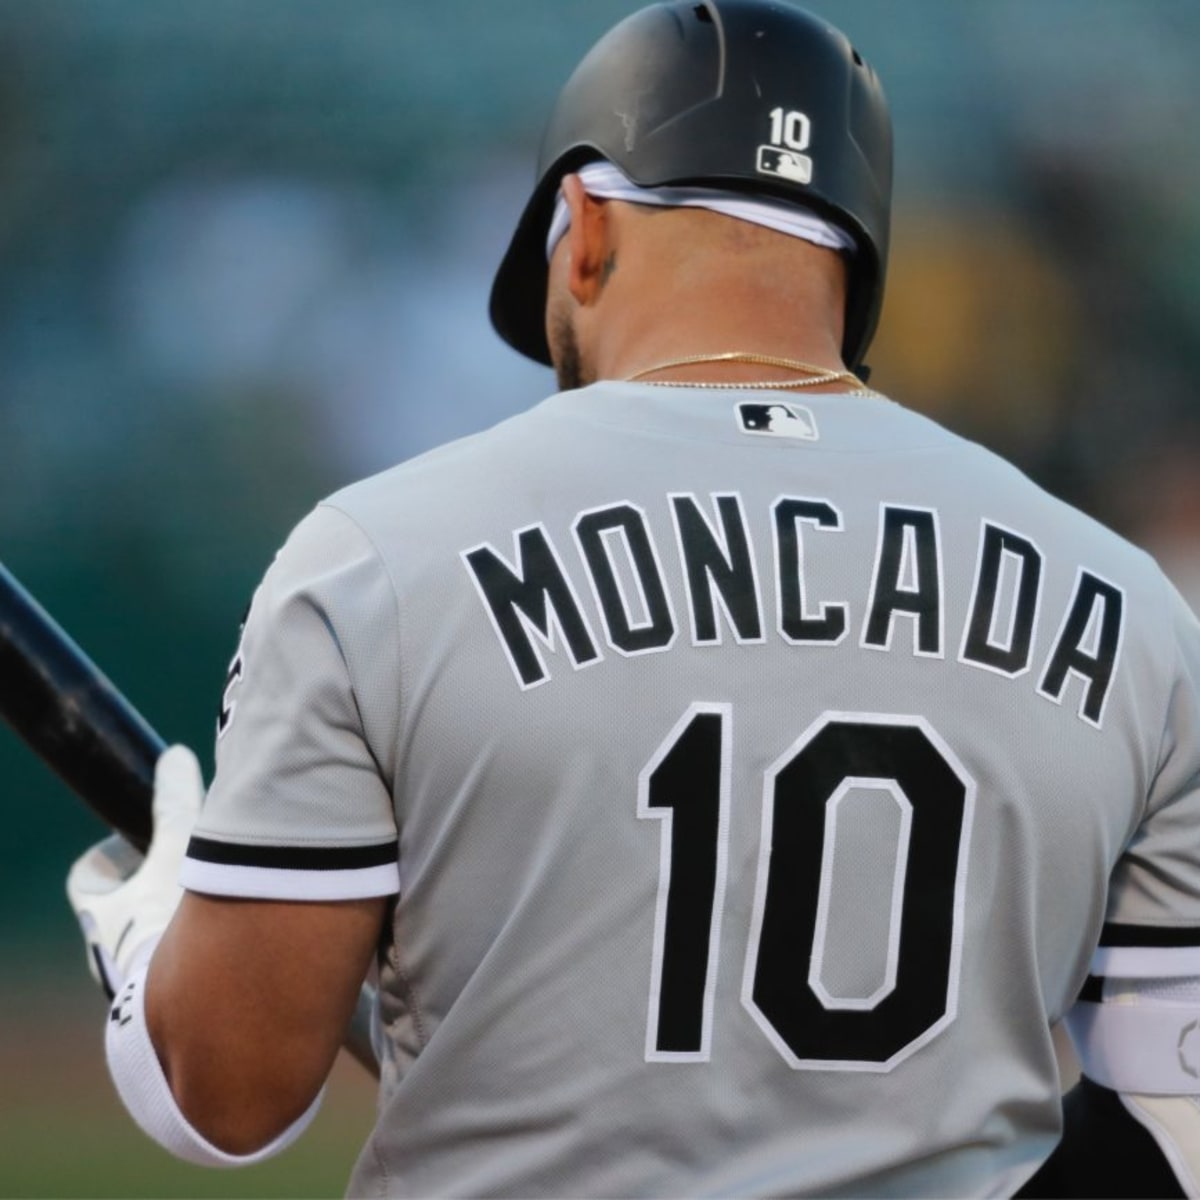 Yoan Moncada and The Great Debate - On Tap Sports Net